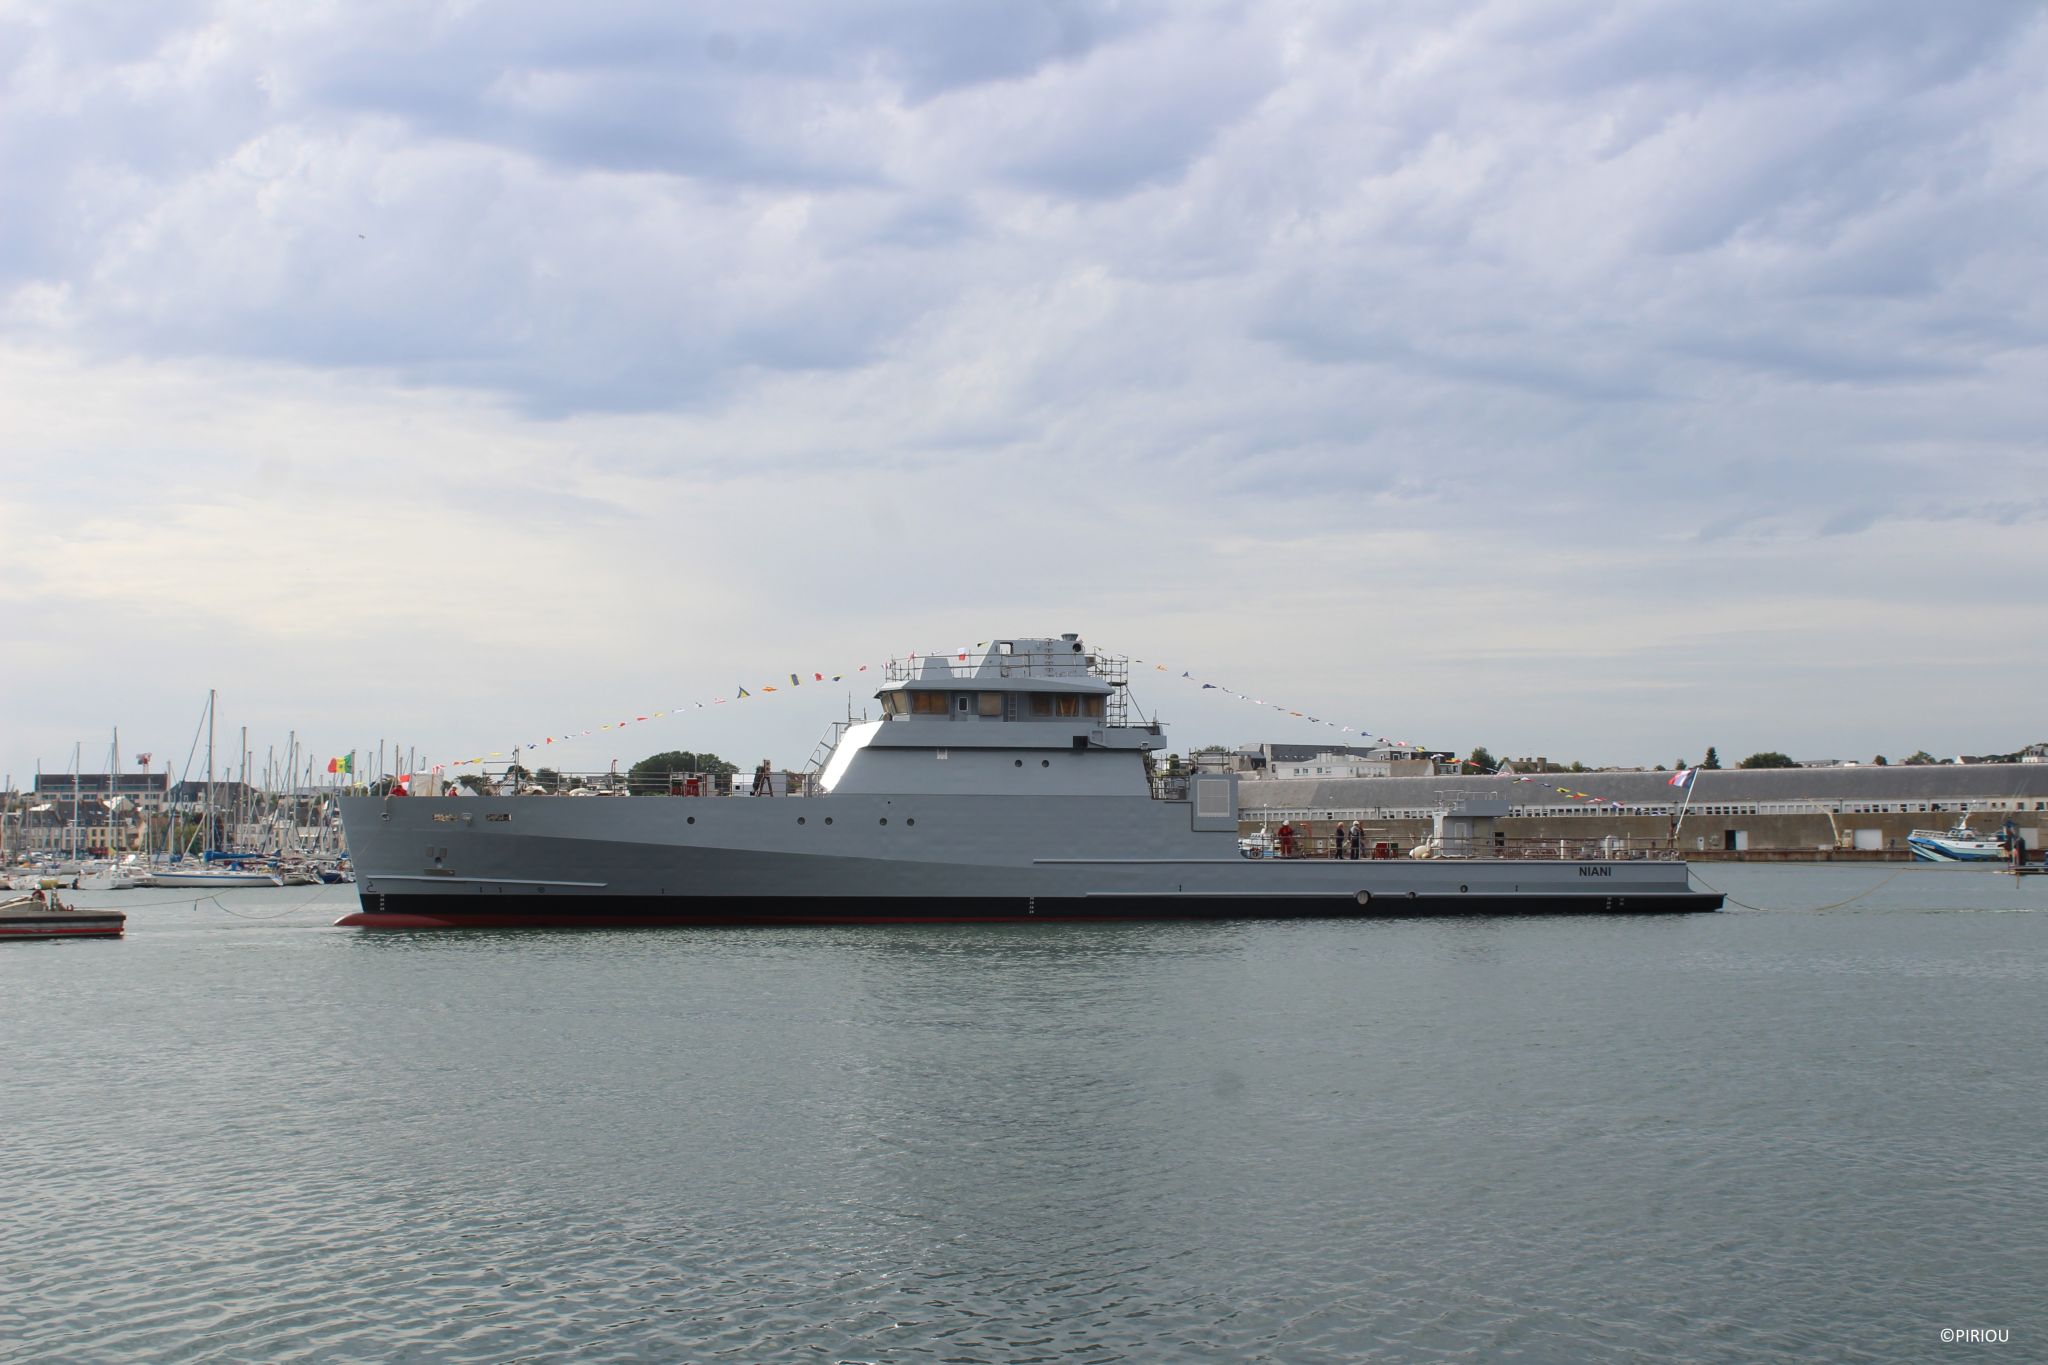 “NIANI”, the second of the three offshore patrol vessels ordered by Senegal has just been launched